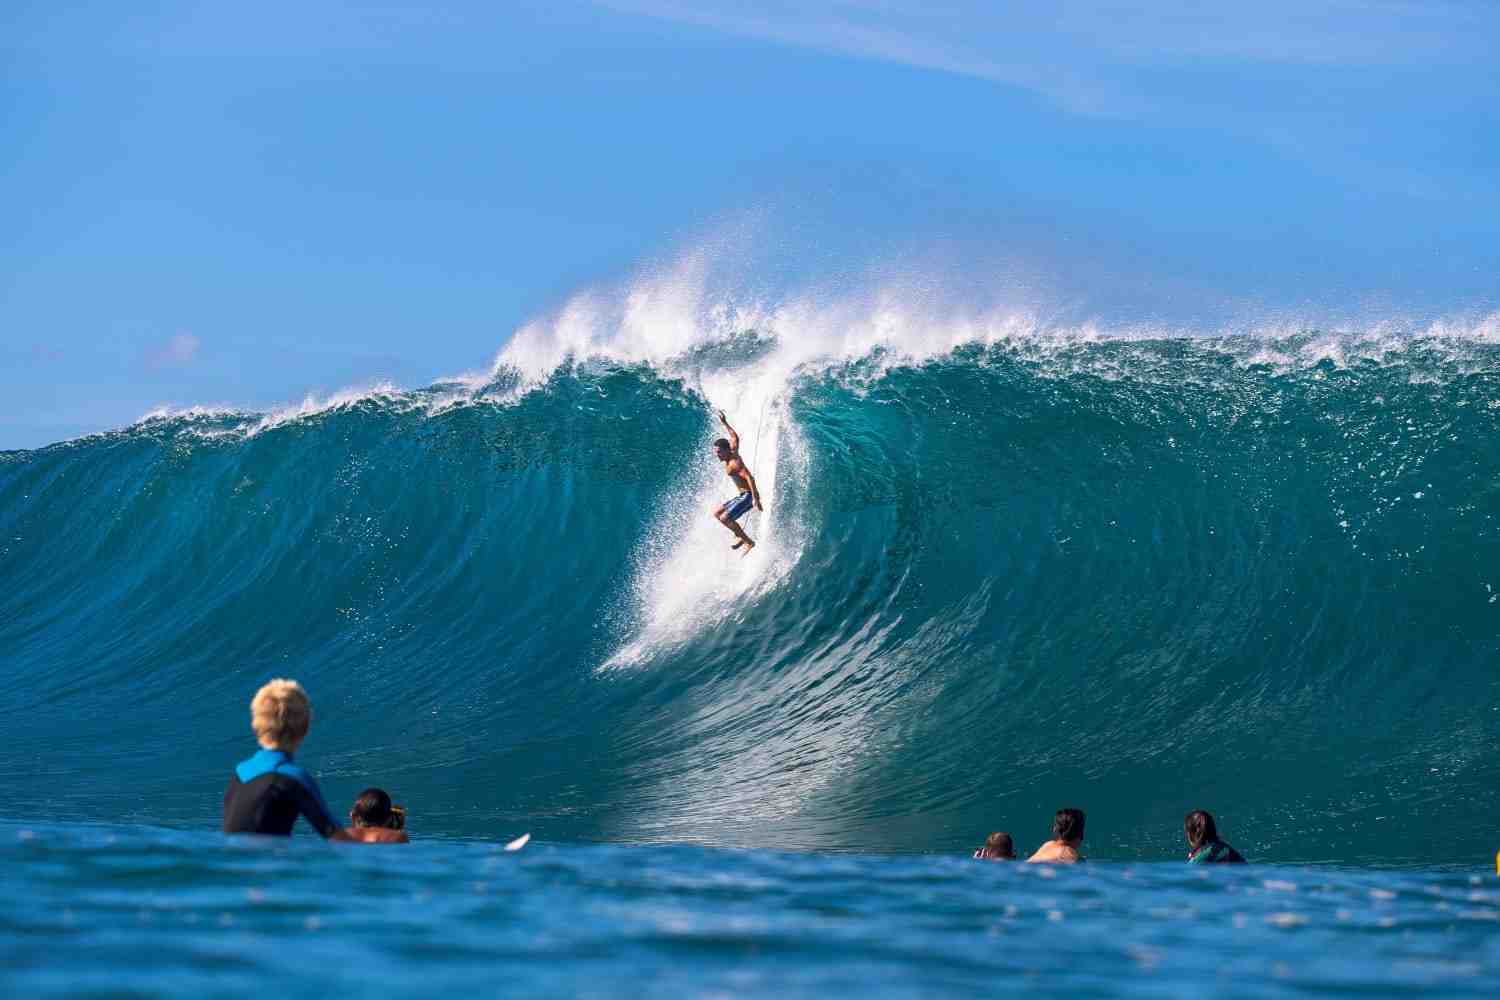 Who was the first to surf Pipeline?